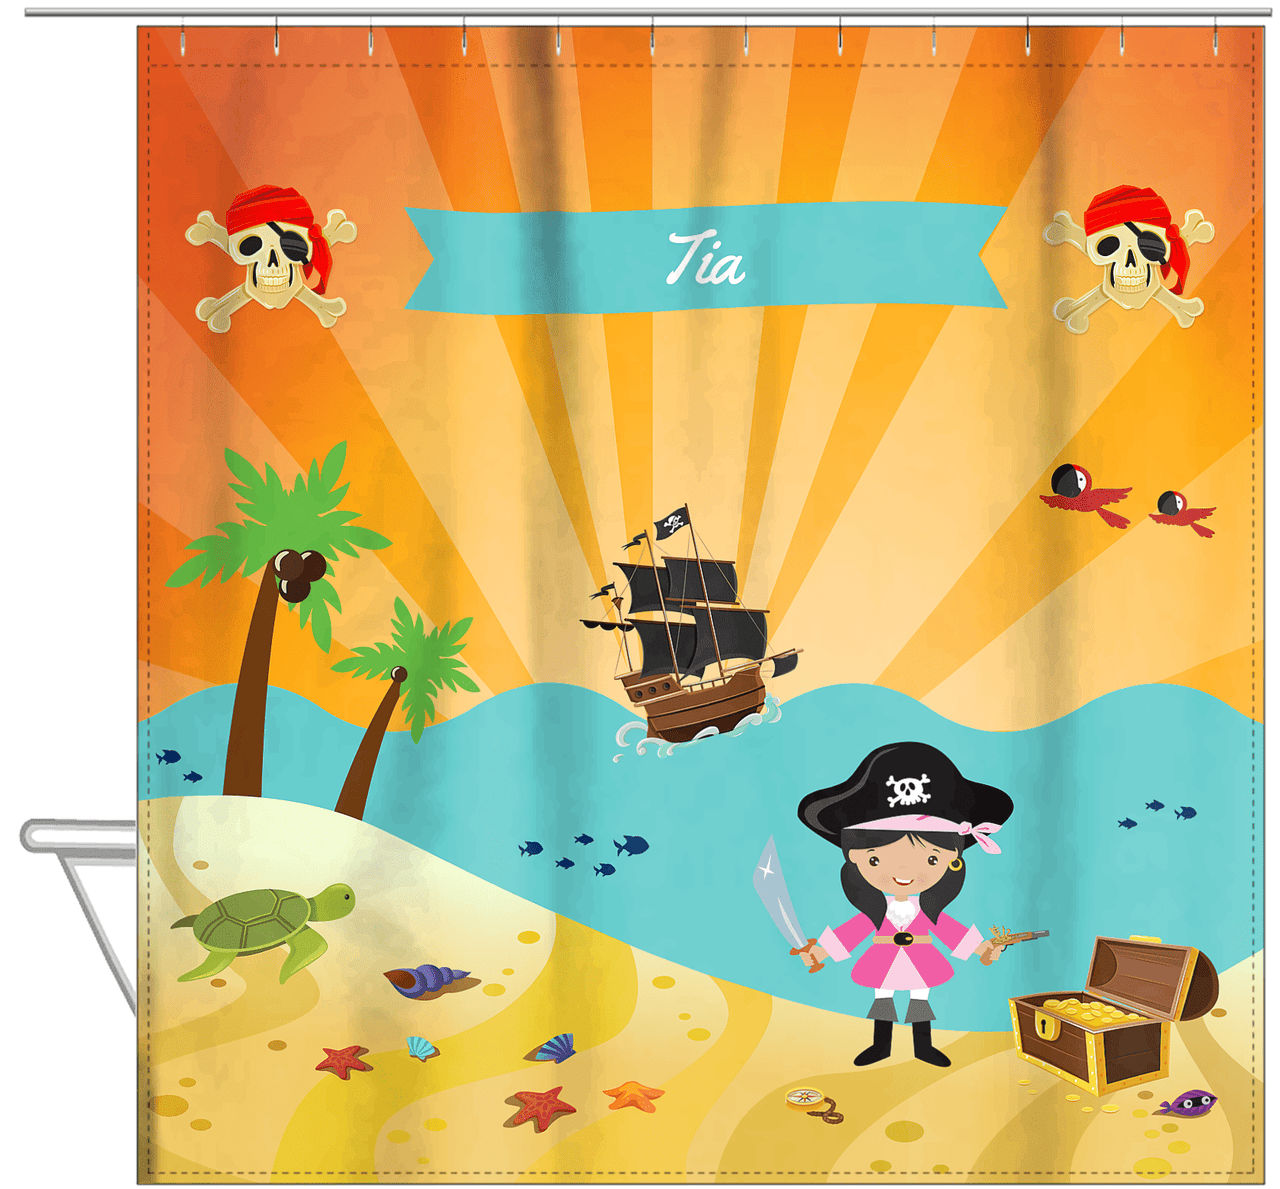 Personalized Pirate Shower Curtain XII - Orange Background - Black Hair Girl with Sword - Hanging View